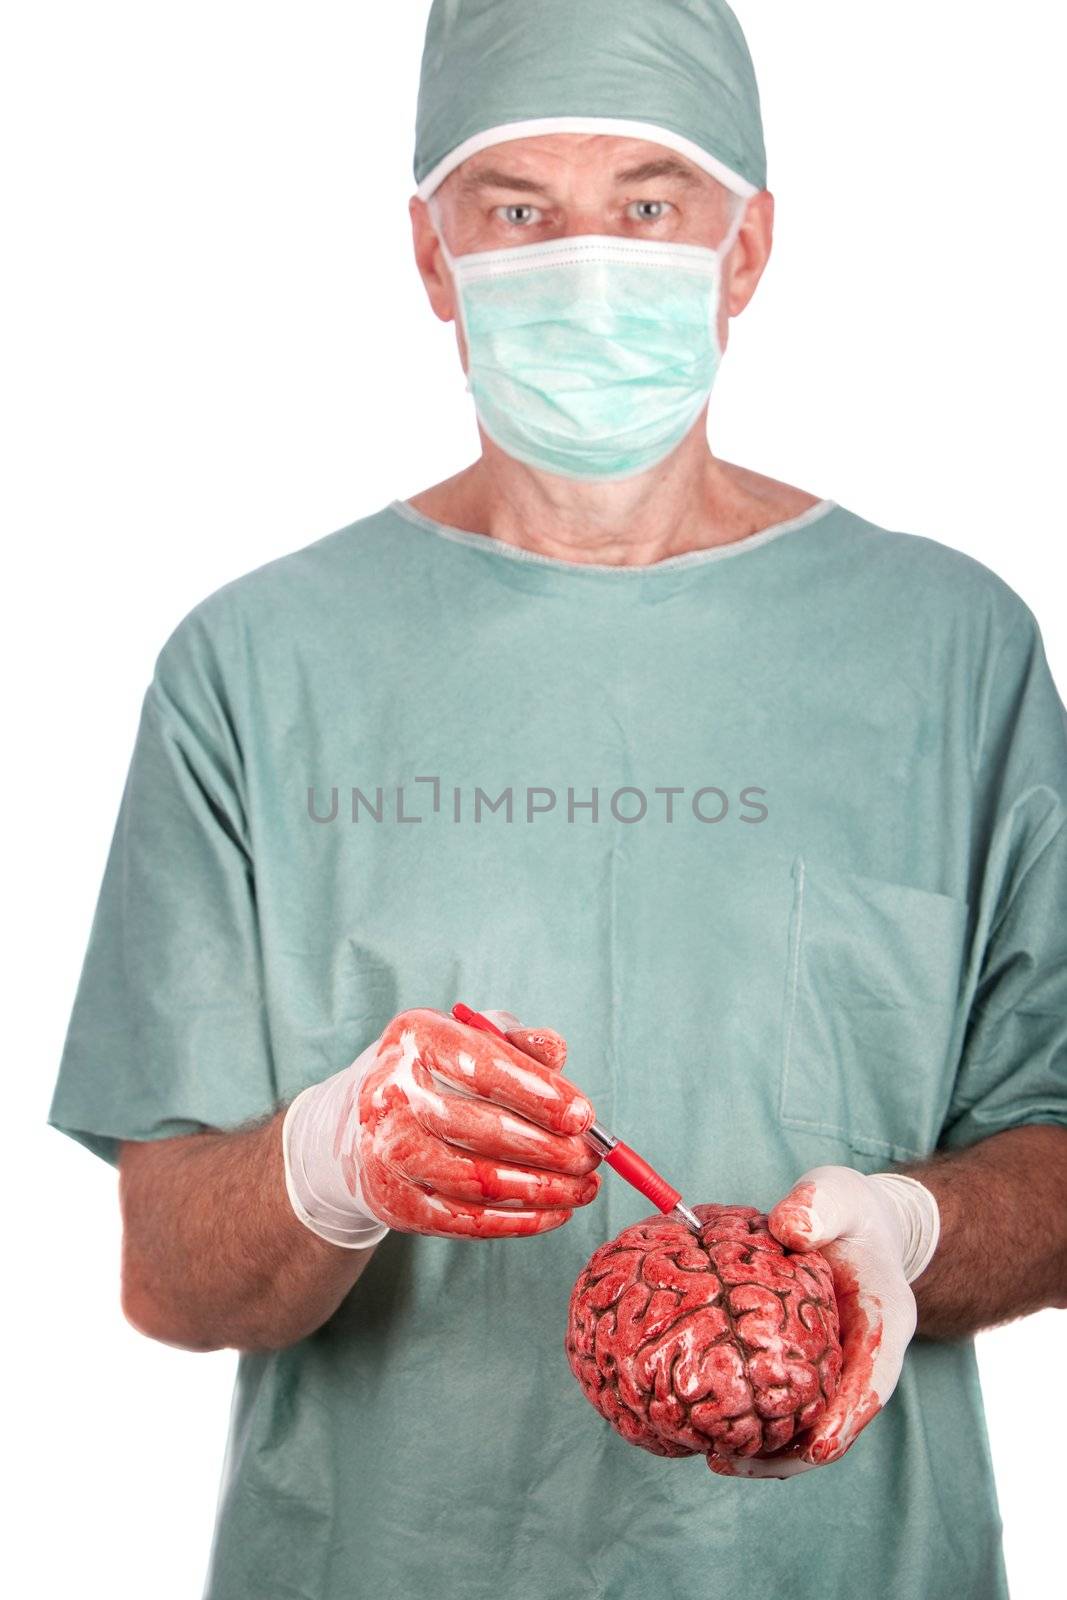 A 60 year old surgeon pointing to a bloody brain.